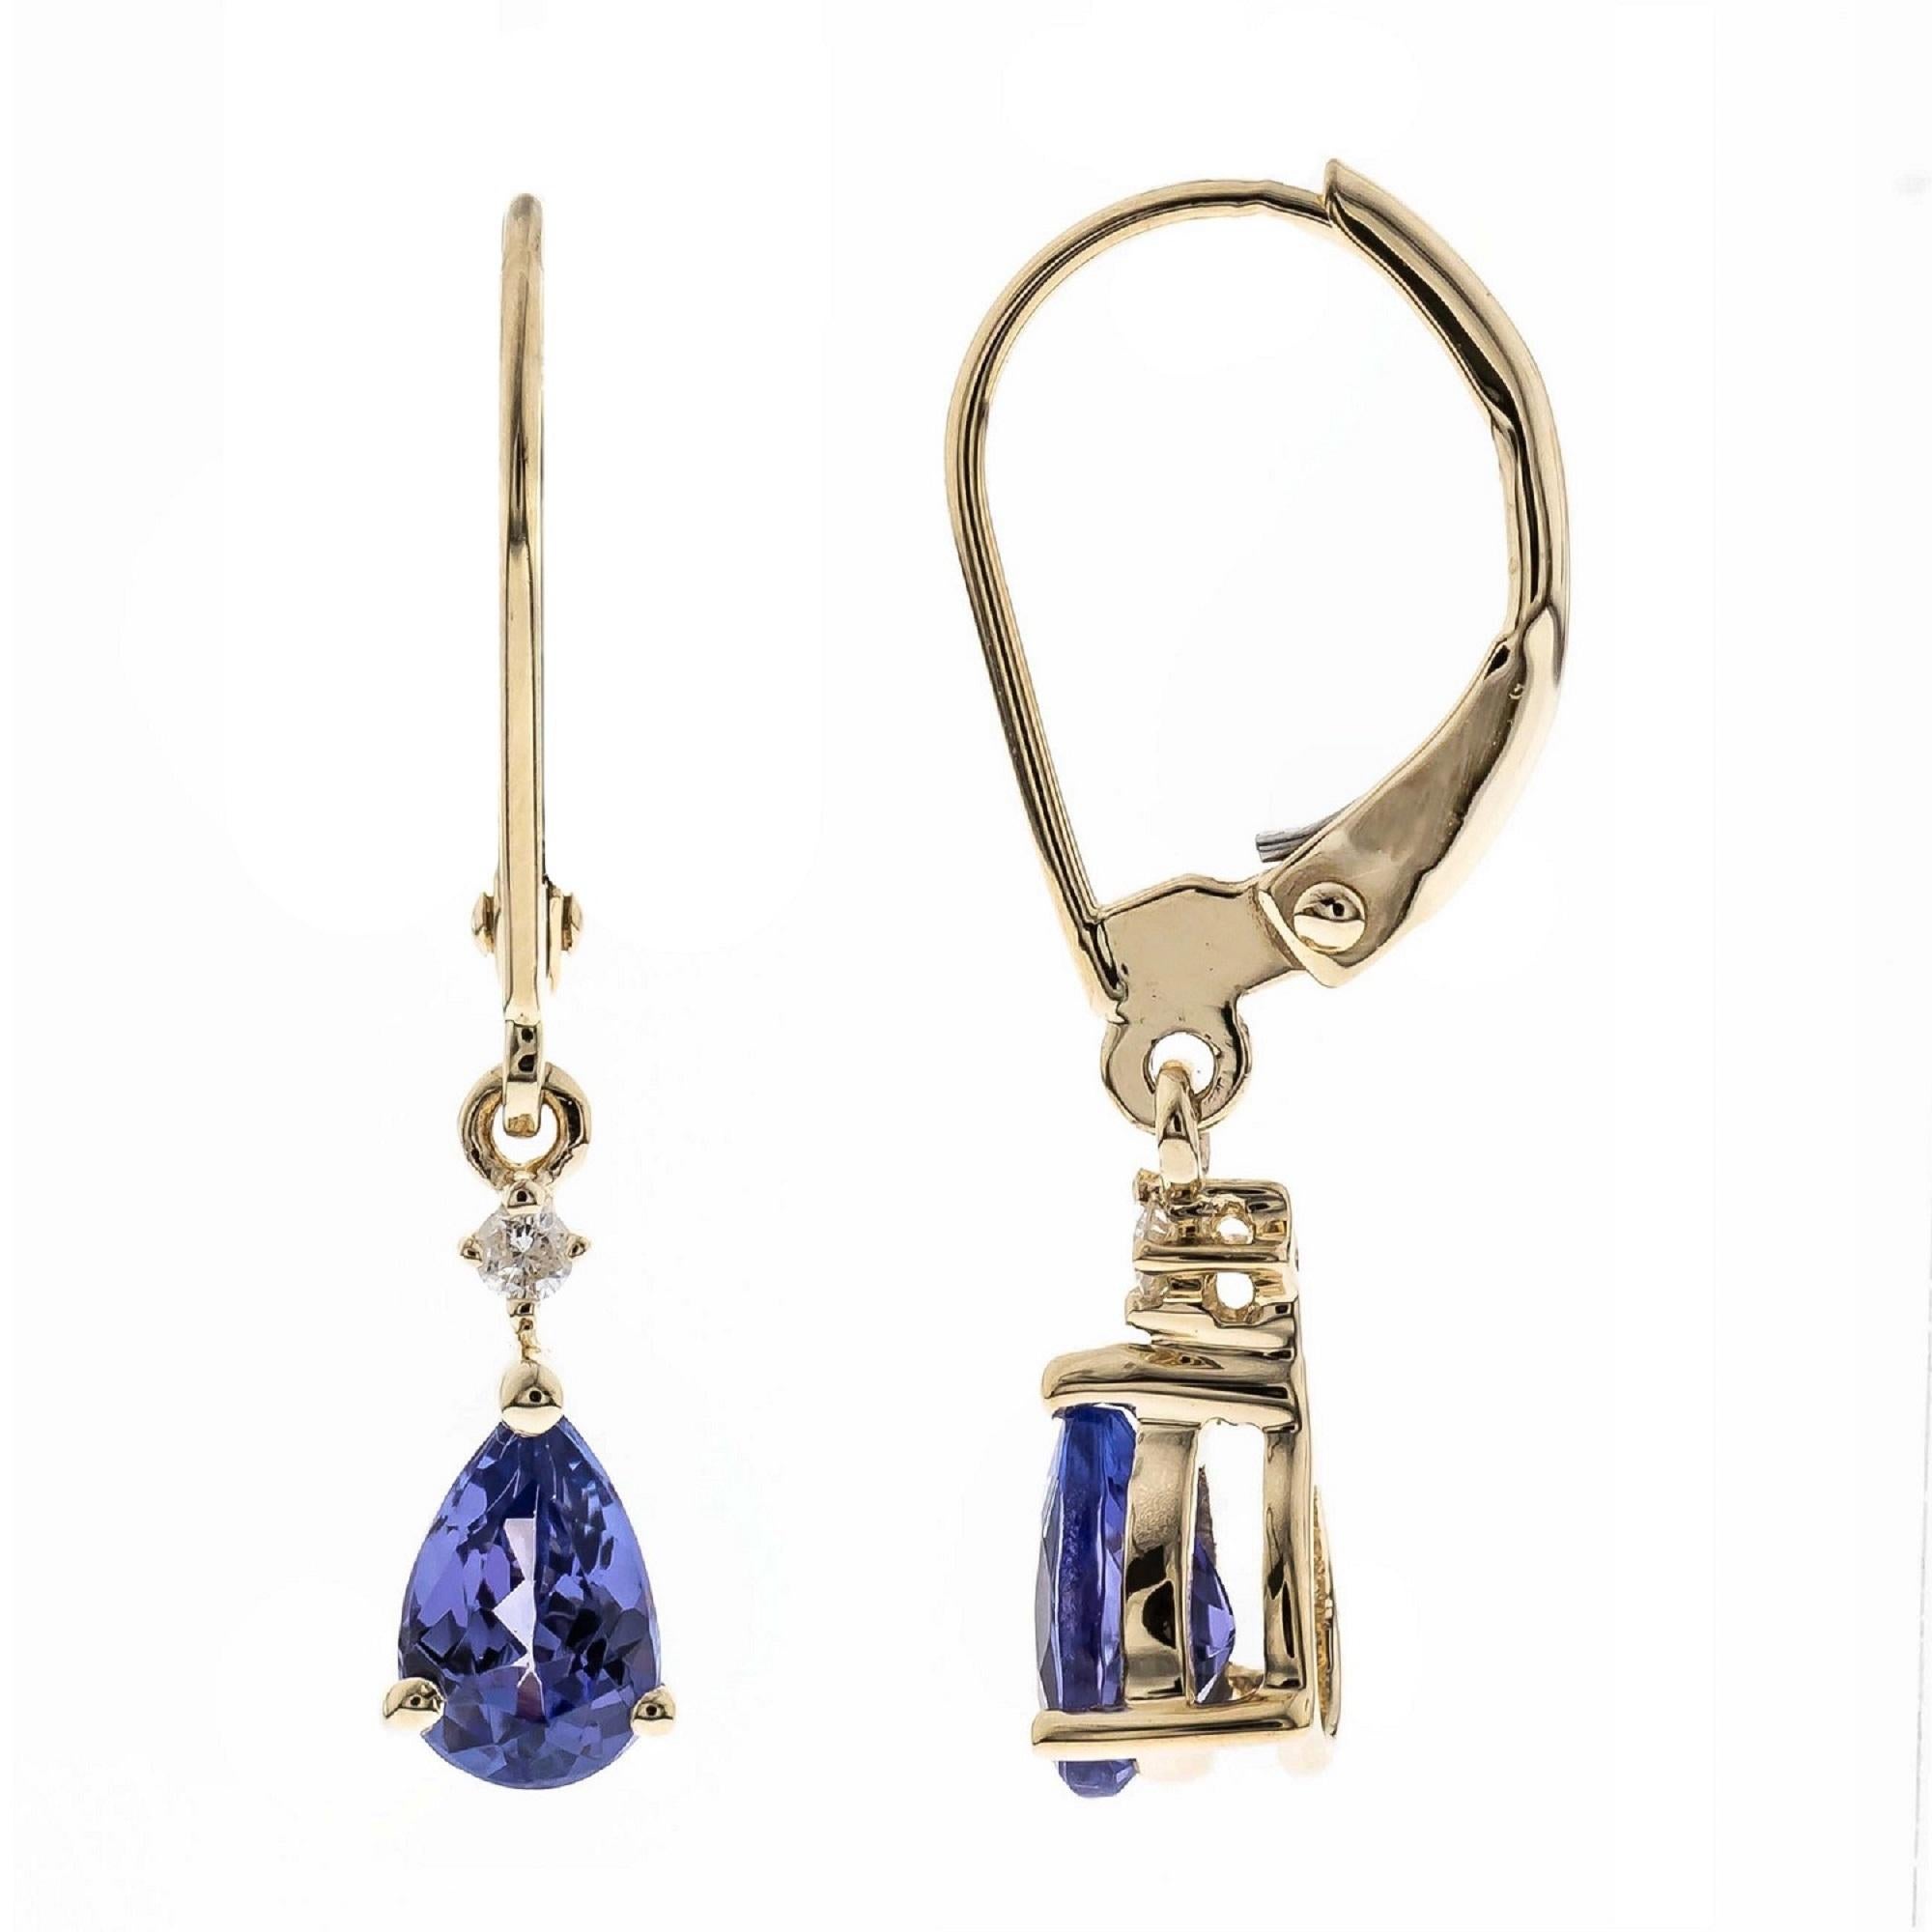 Decorate yourself in elegance with this Earring is crafted from 14K Yellow Gold by Gin & Grace Earring. The jewelry boasts 4X6 Pear-Cut prong setting blue color Tanzanite (2 pcs) 1.0 Carat and Round-Cut prong setting Diamond (2 pcs) 0.03 Carat. This